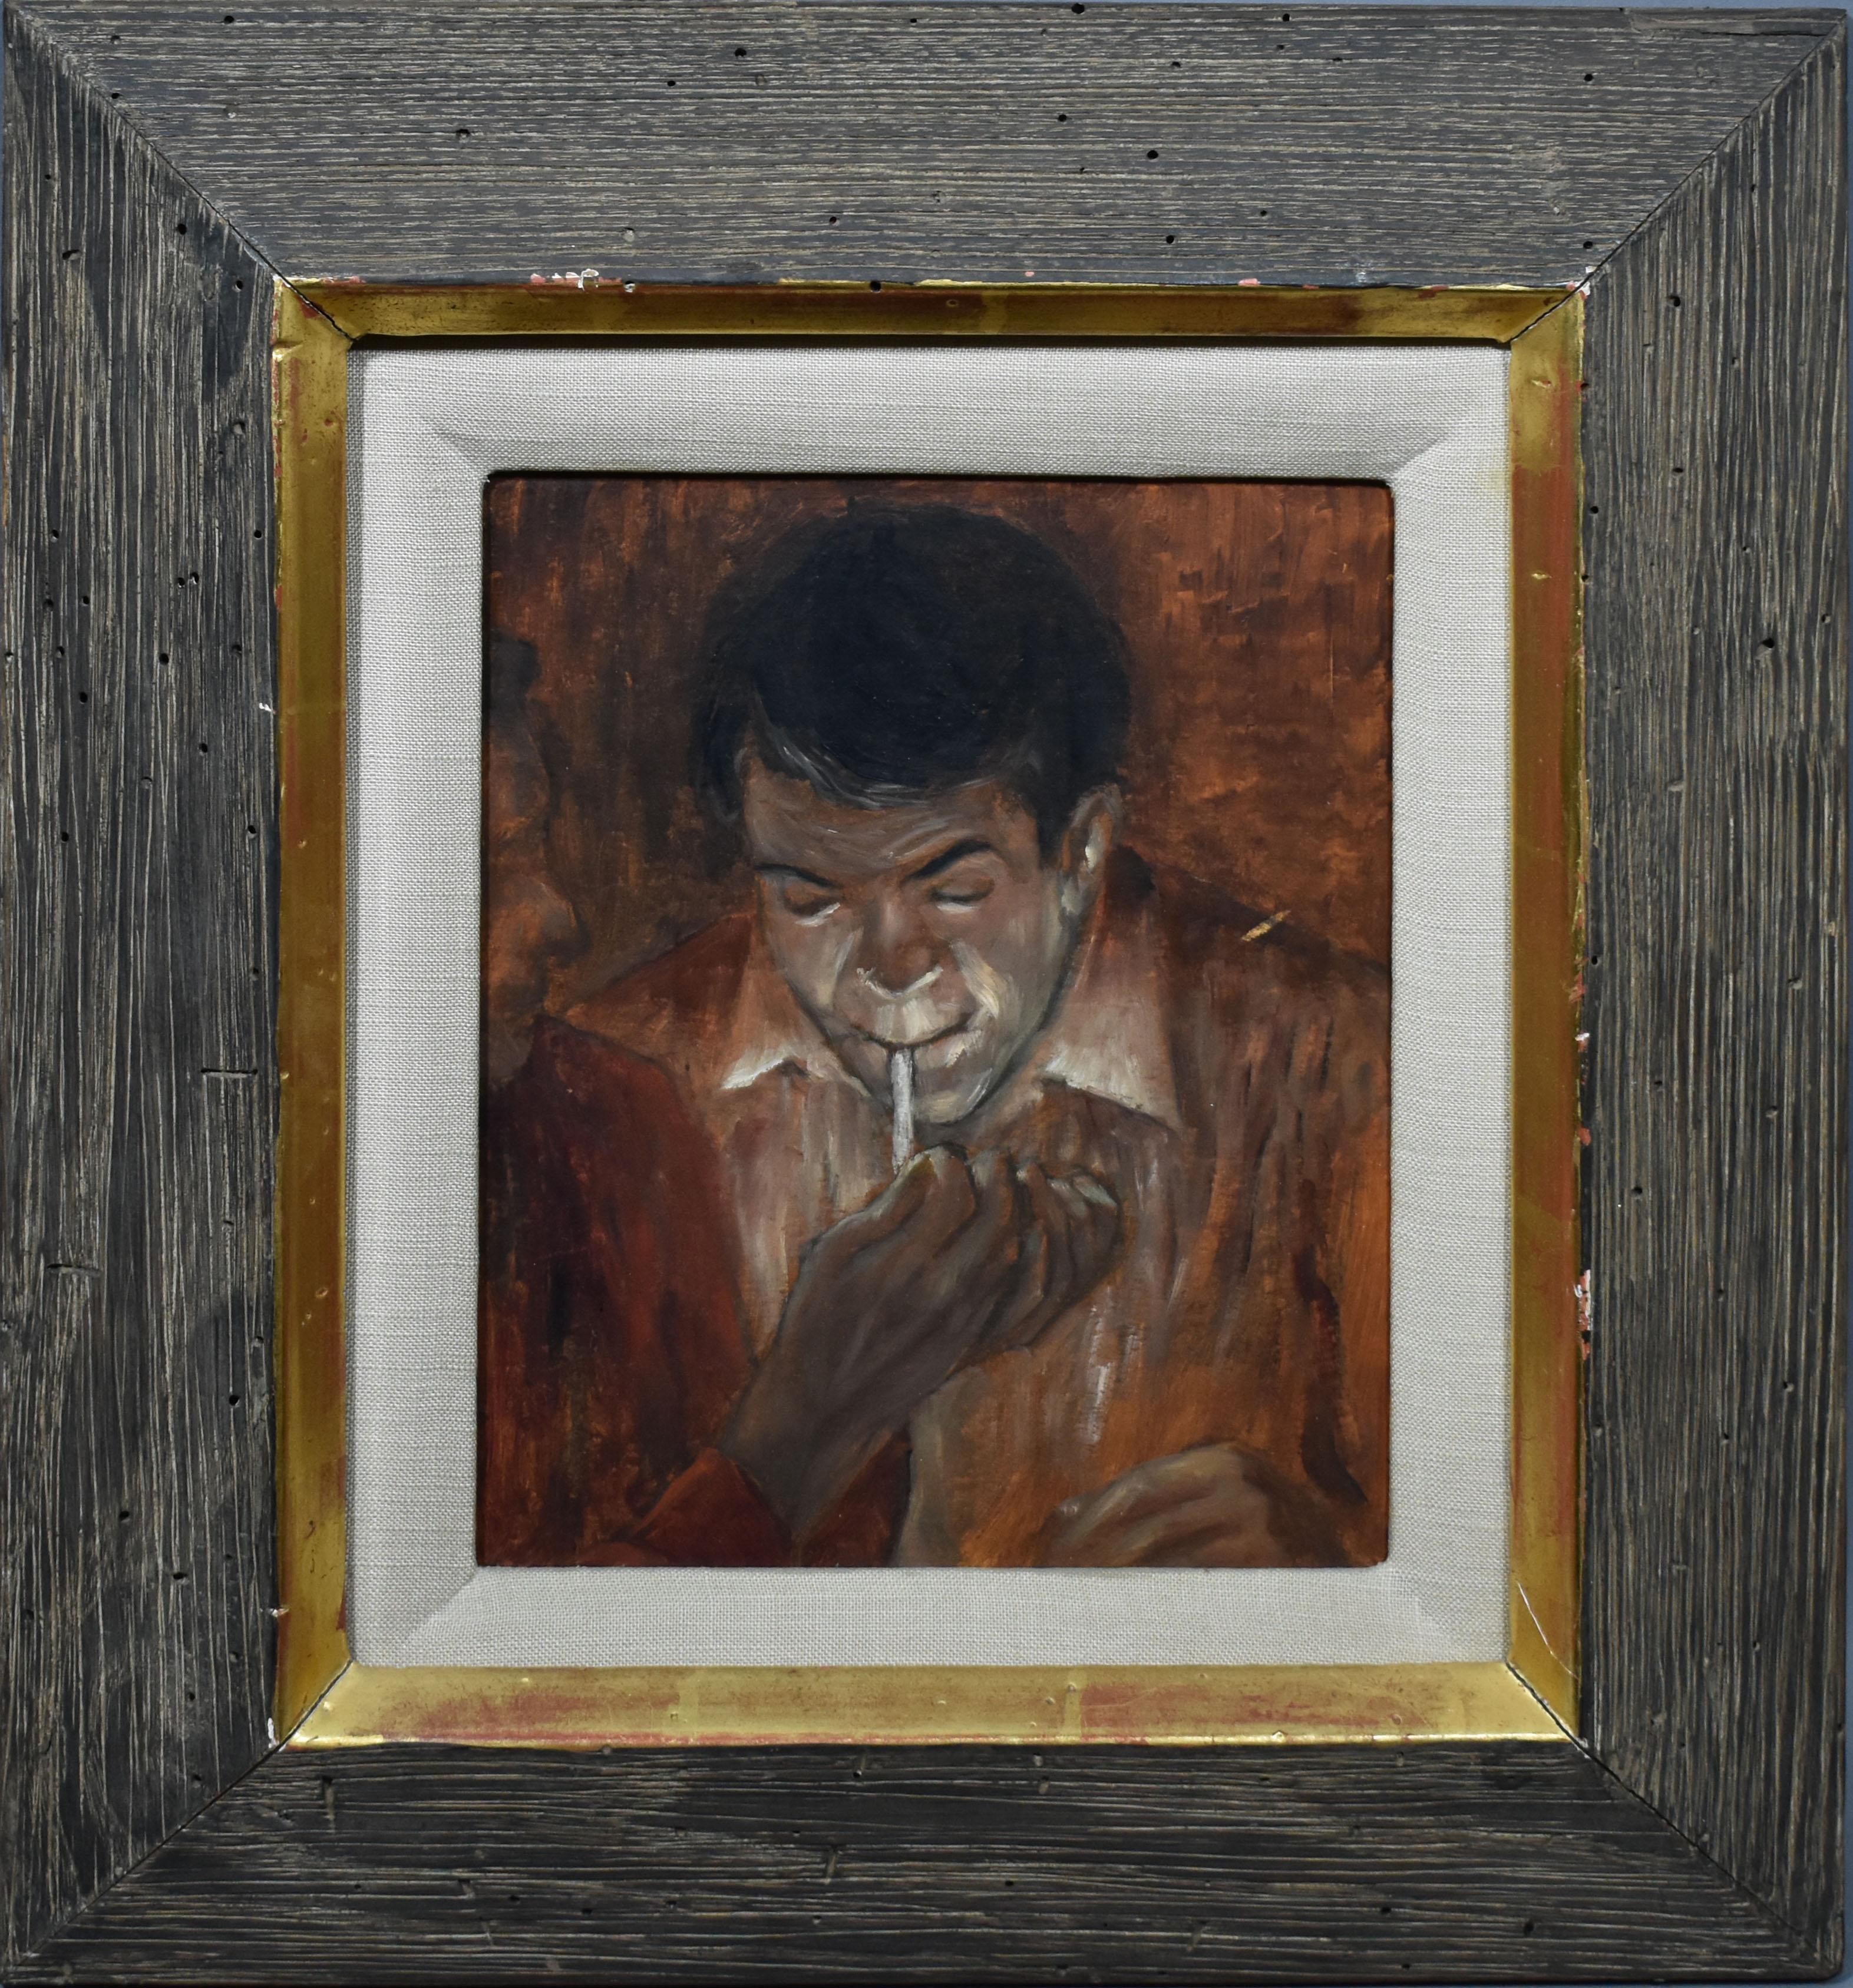 Carl Laughlin  (born 1926) Interior Painting - Antique American Modernist WPA Male Smoking Portrait Oil Painting  Carl Laughlin